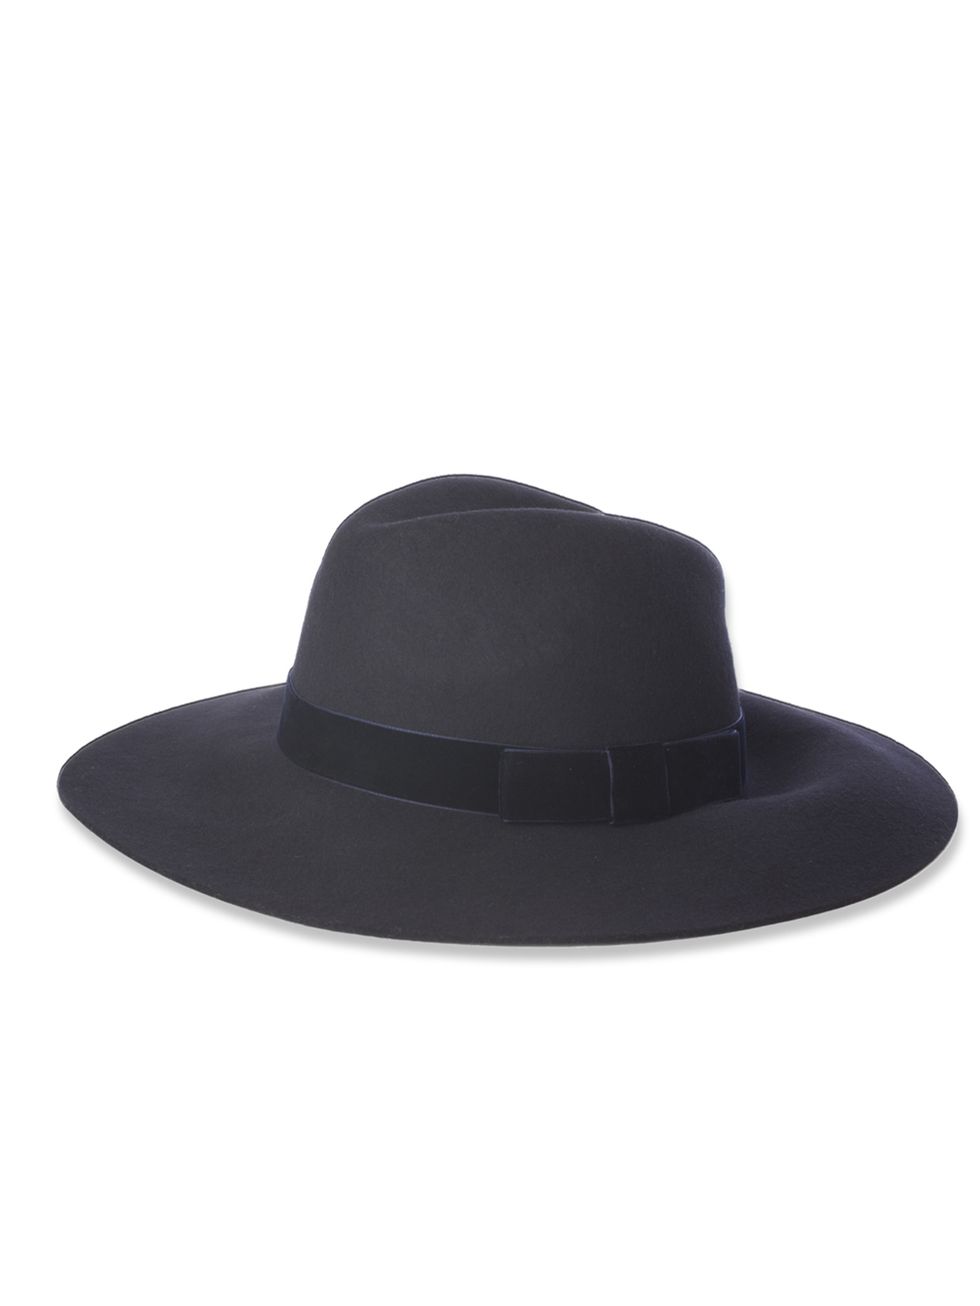 <p>French Connection Navy Fedora, £40</p><p><a href="http://shopping.elleuk.com/browse?fts=french+connection+fedora">BUY NOW</a></p>